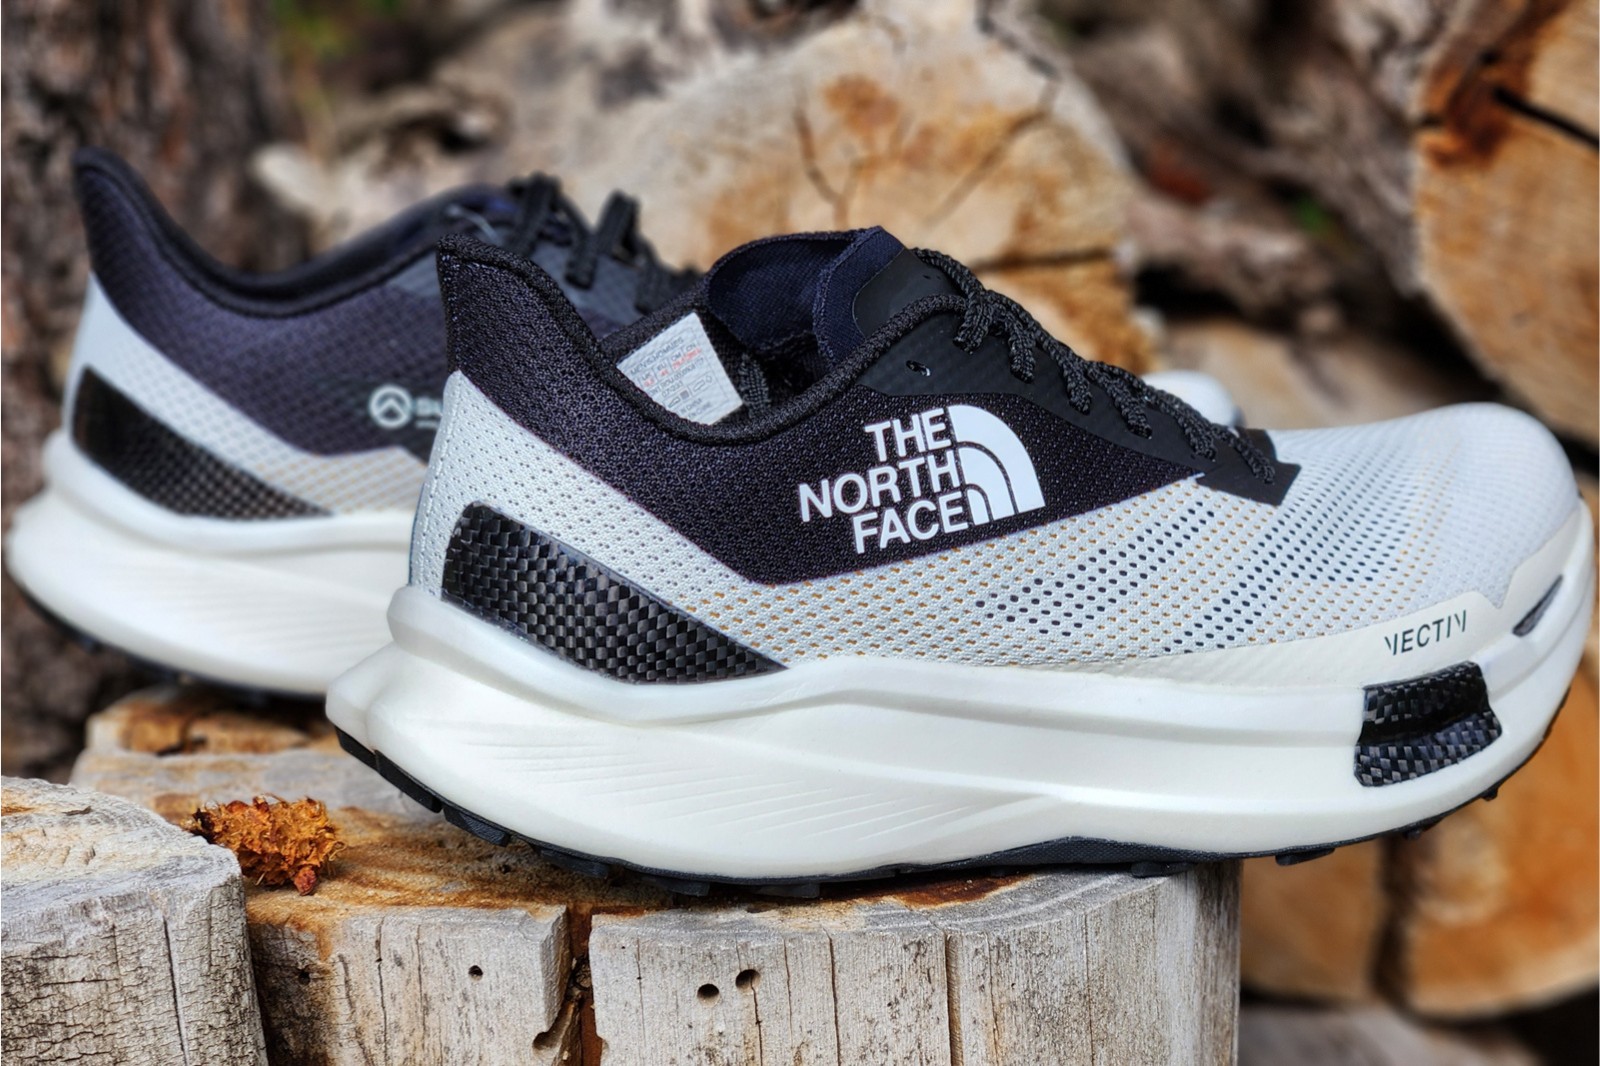 The North Face Summit Vectiv Pro 2: First Thoughts - Believe in